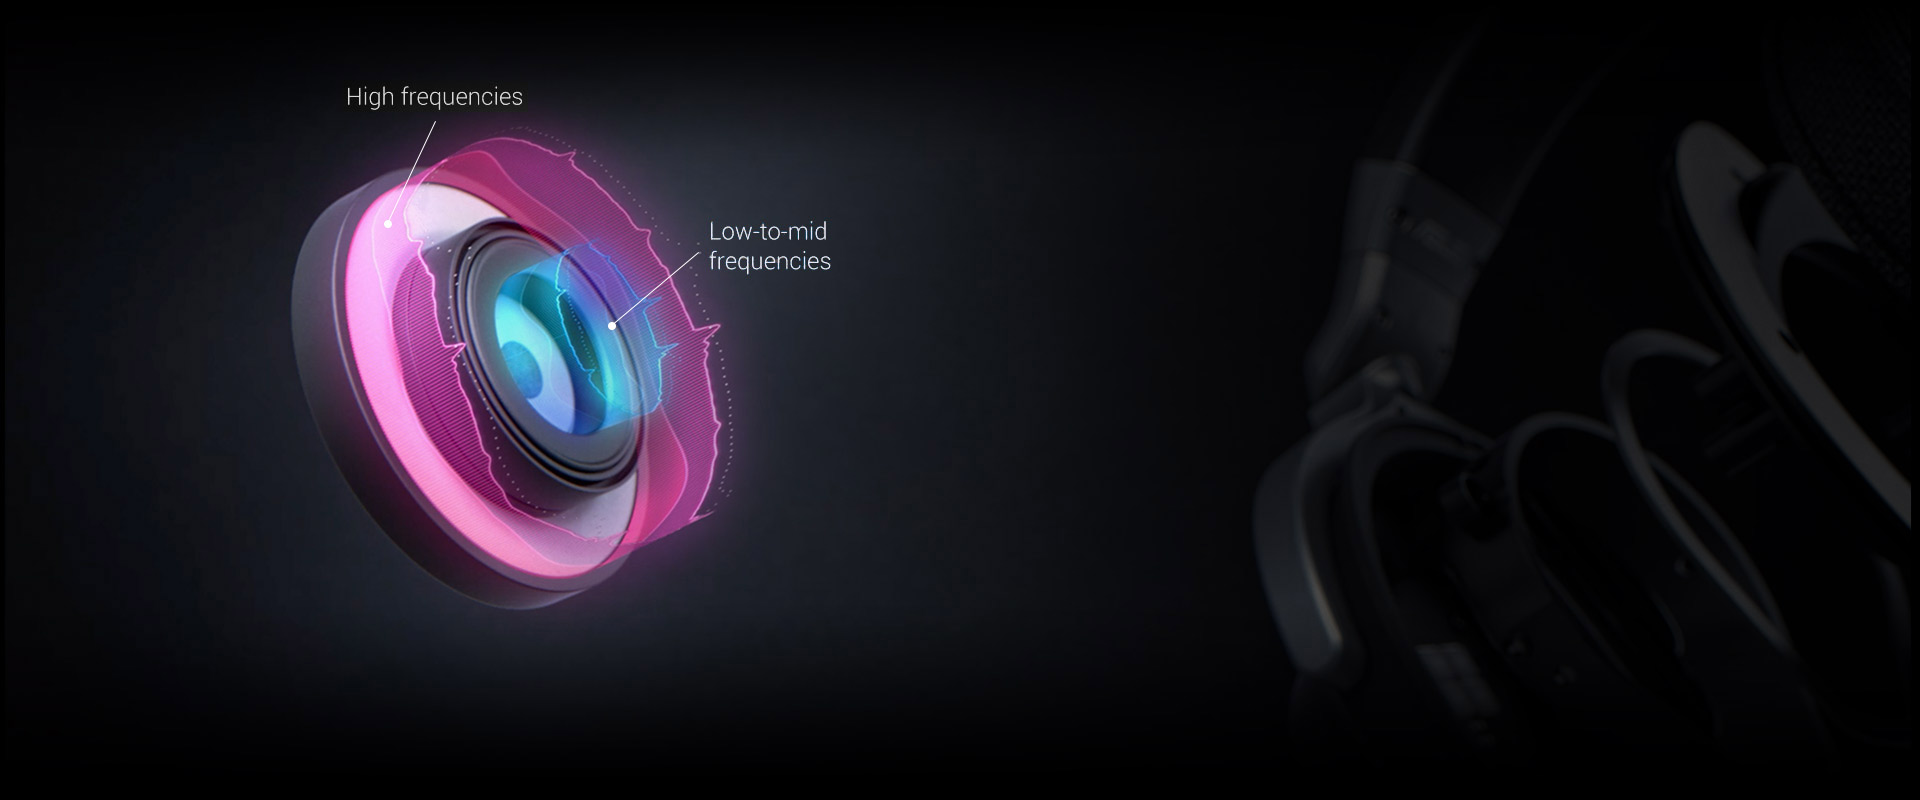 Design highlight of the ASUS Essence driver and its ability to deliver high and low-to-mid frequency sound